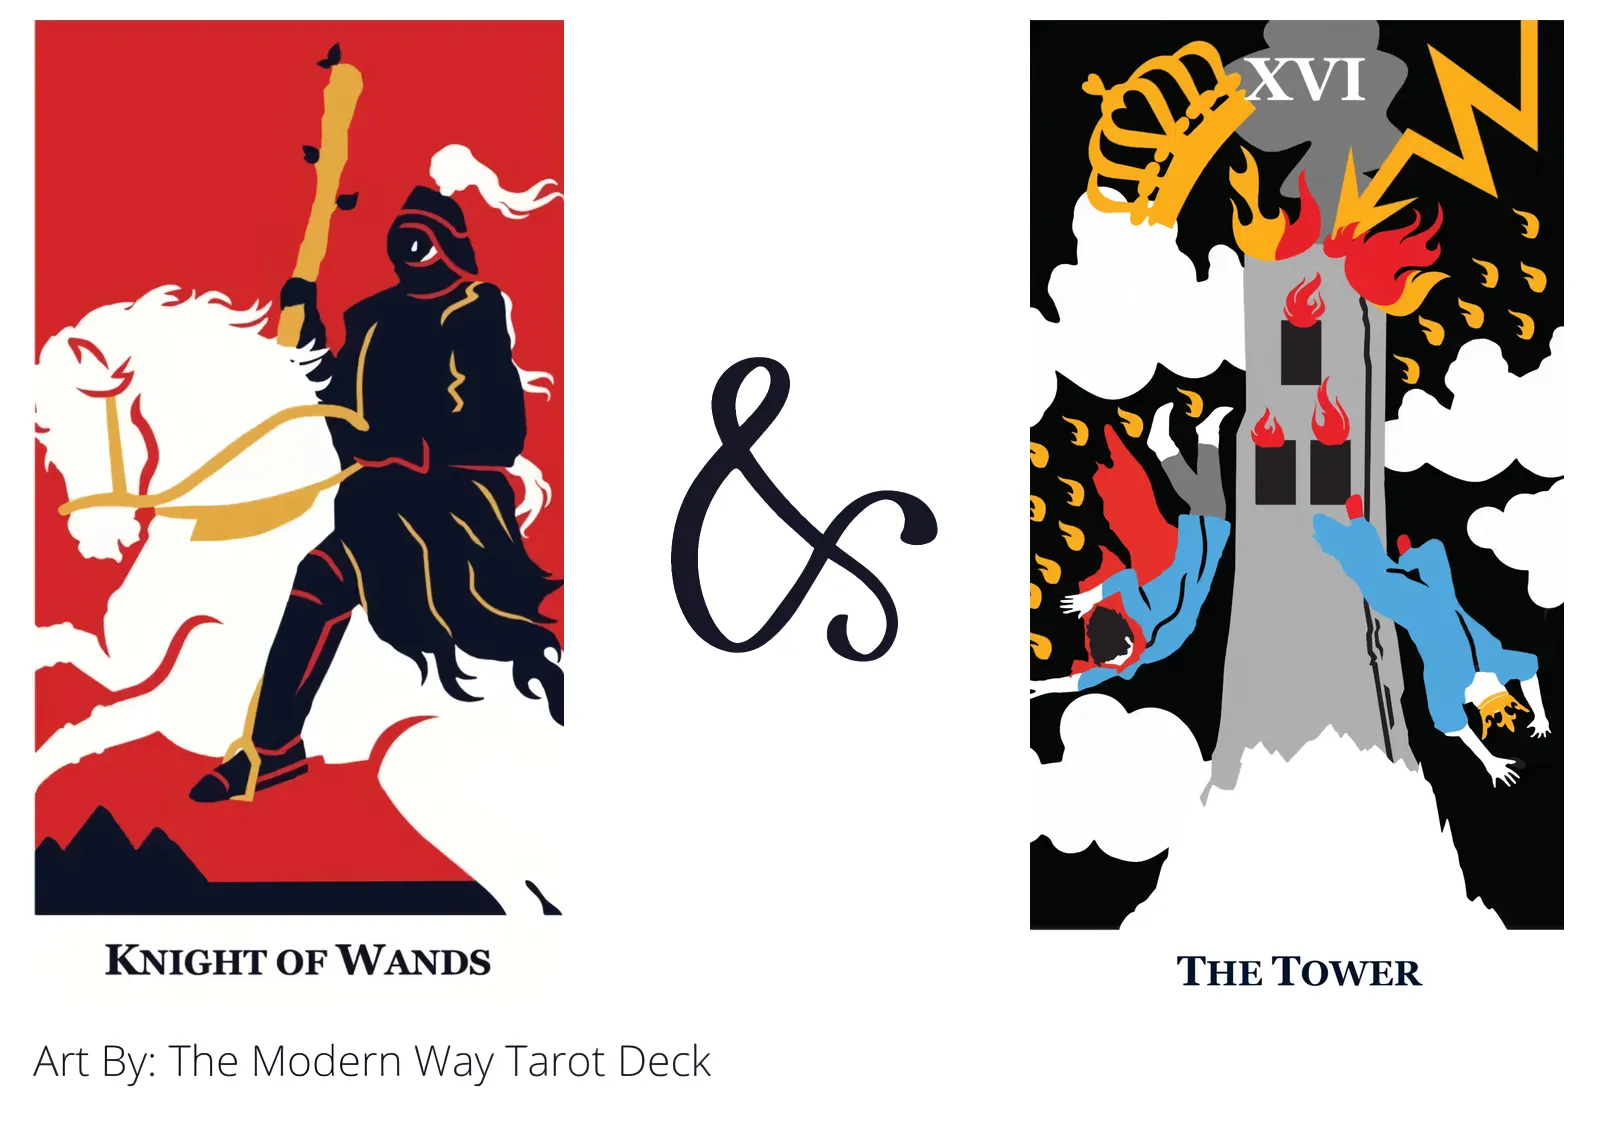 knight of wands and the tower tarot cards together